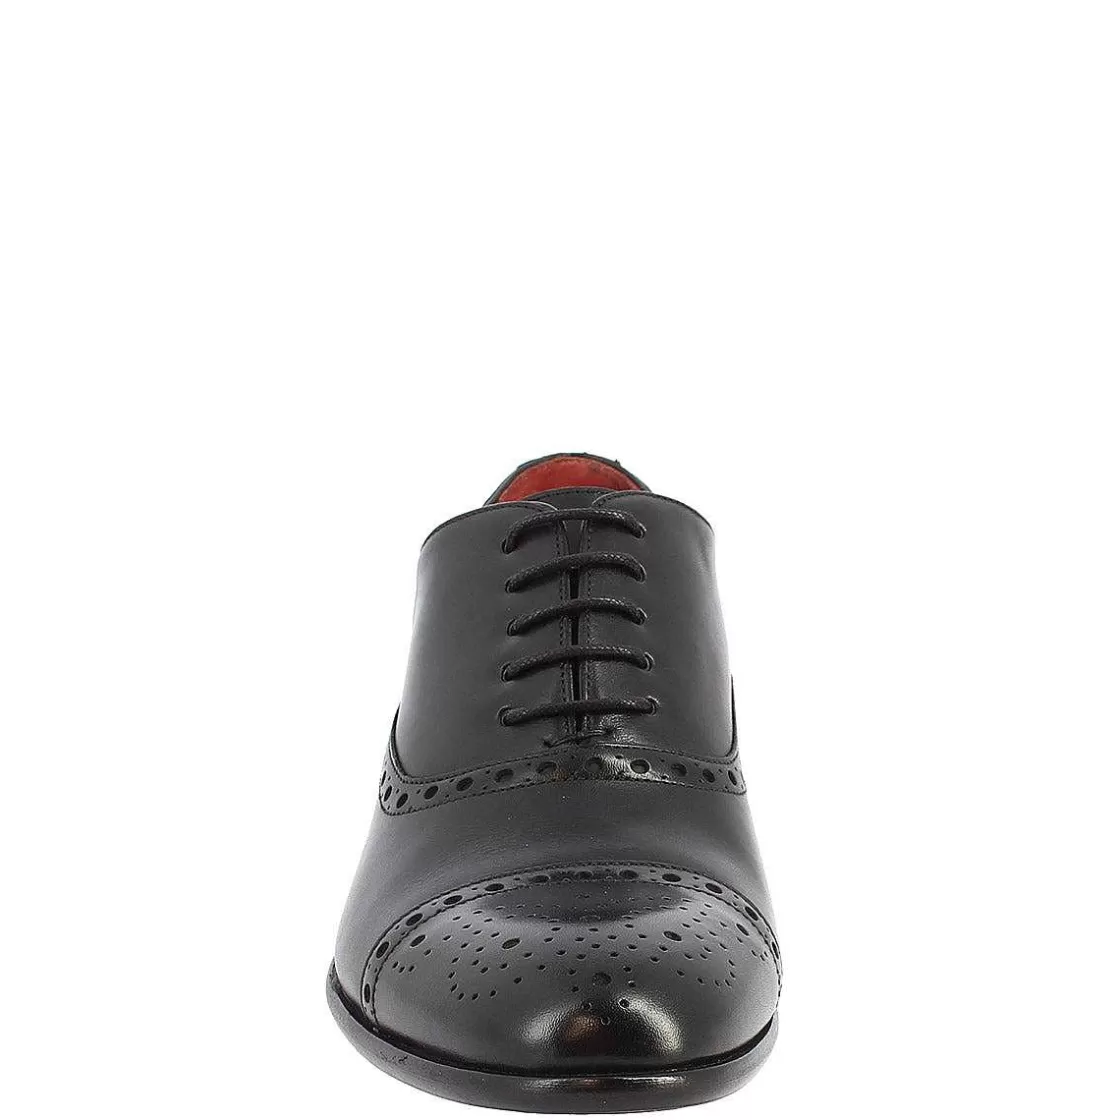 Leonardo Men'S Lace-Up Shoes Handmade In Black Leather Clearance